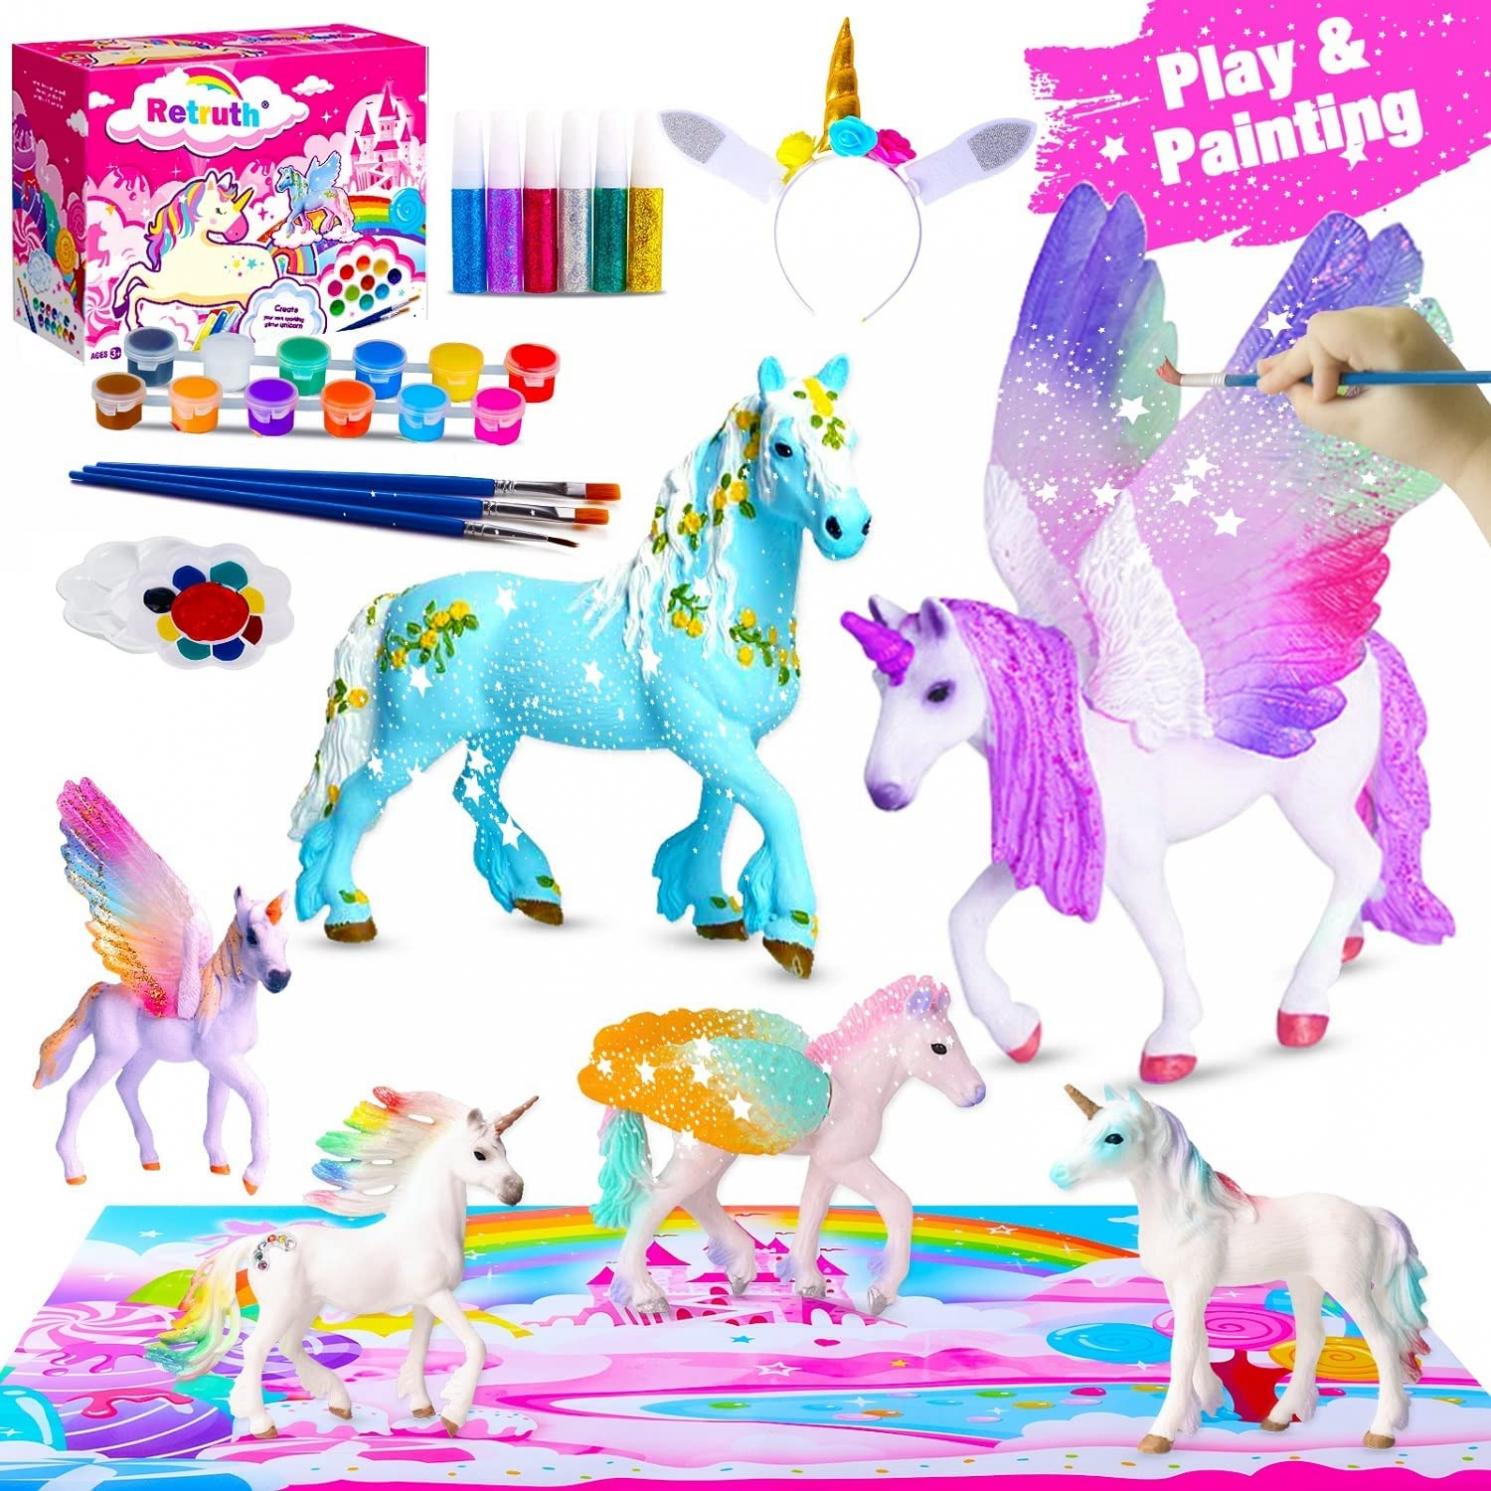 Retruth Unicorn Painting Kit for Kids, Unicorns Gifts for Girls Age 4 5 6 7 8, Paint Your Own Unicorn Arts & Crafts Painting Kits for Kids Age 4-8, Water-Based Unicorn Coloring Kits for Kids Girls